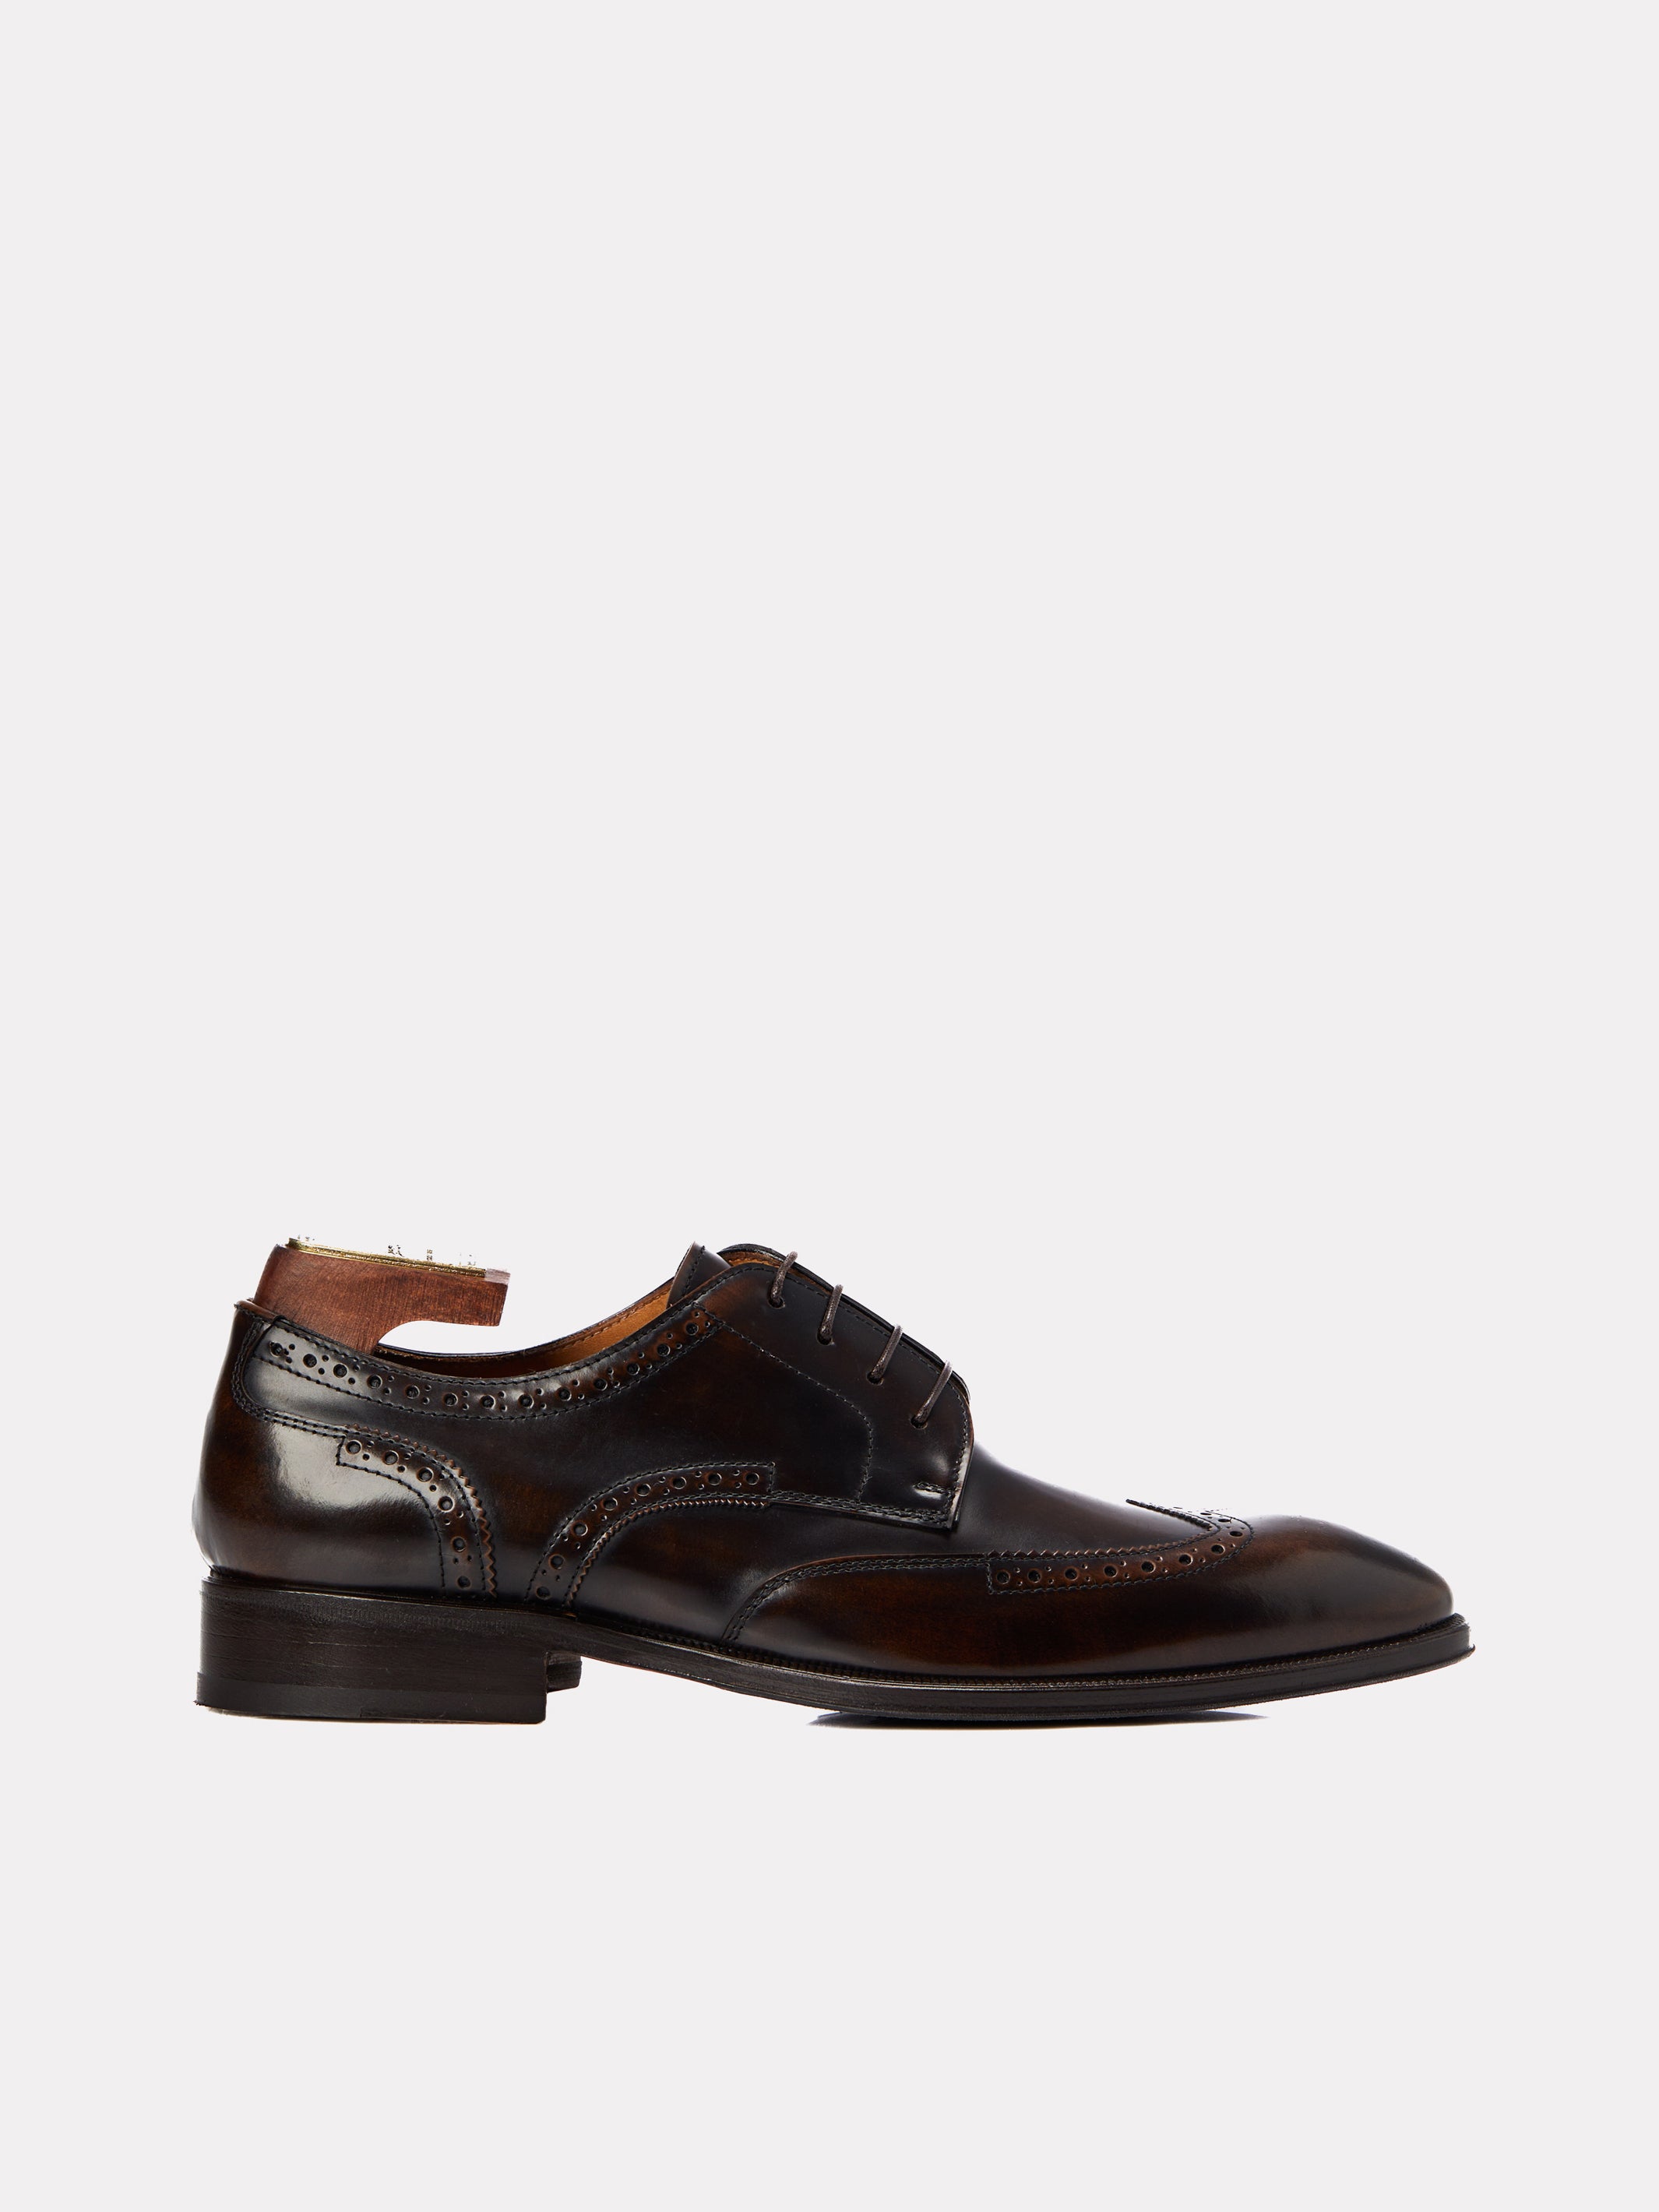 Brown derby shoes with brogue details